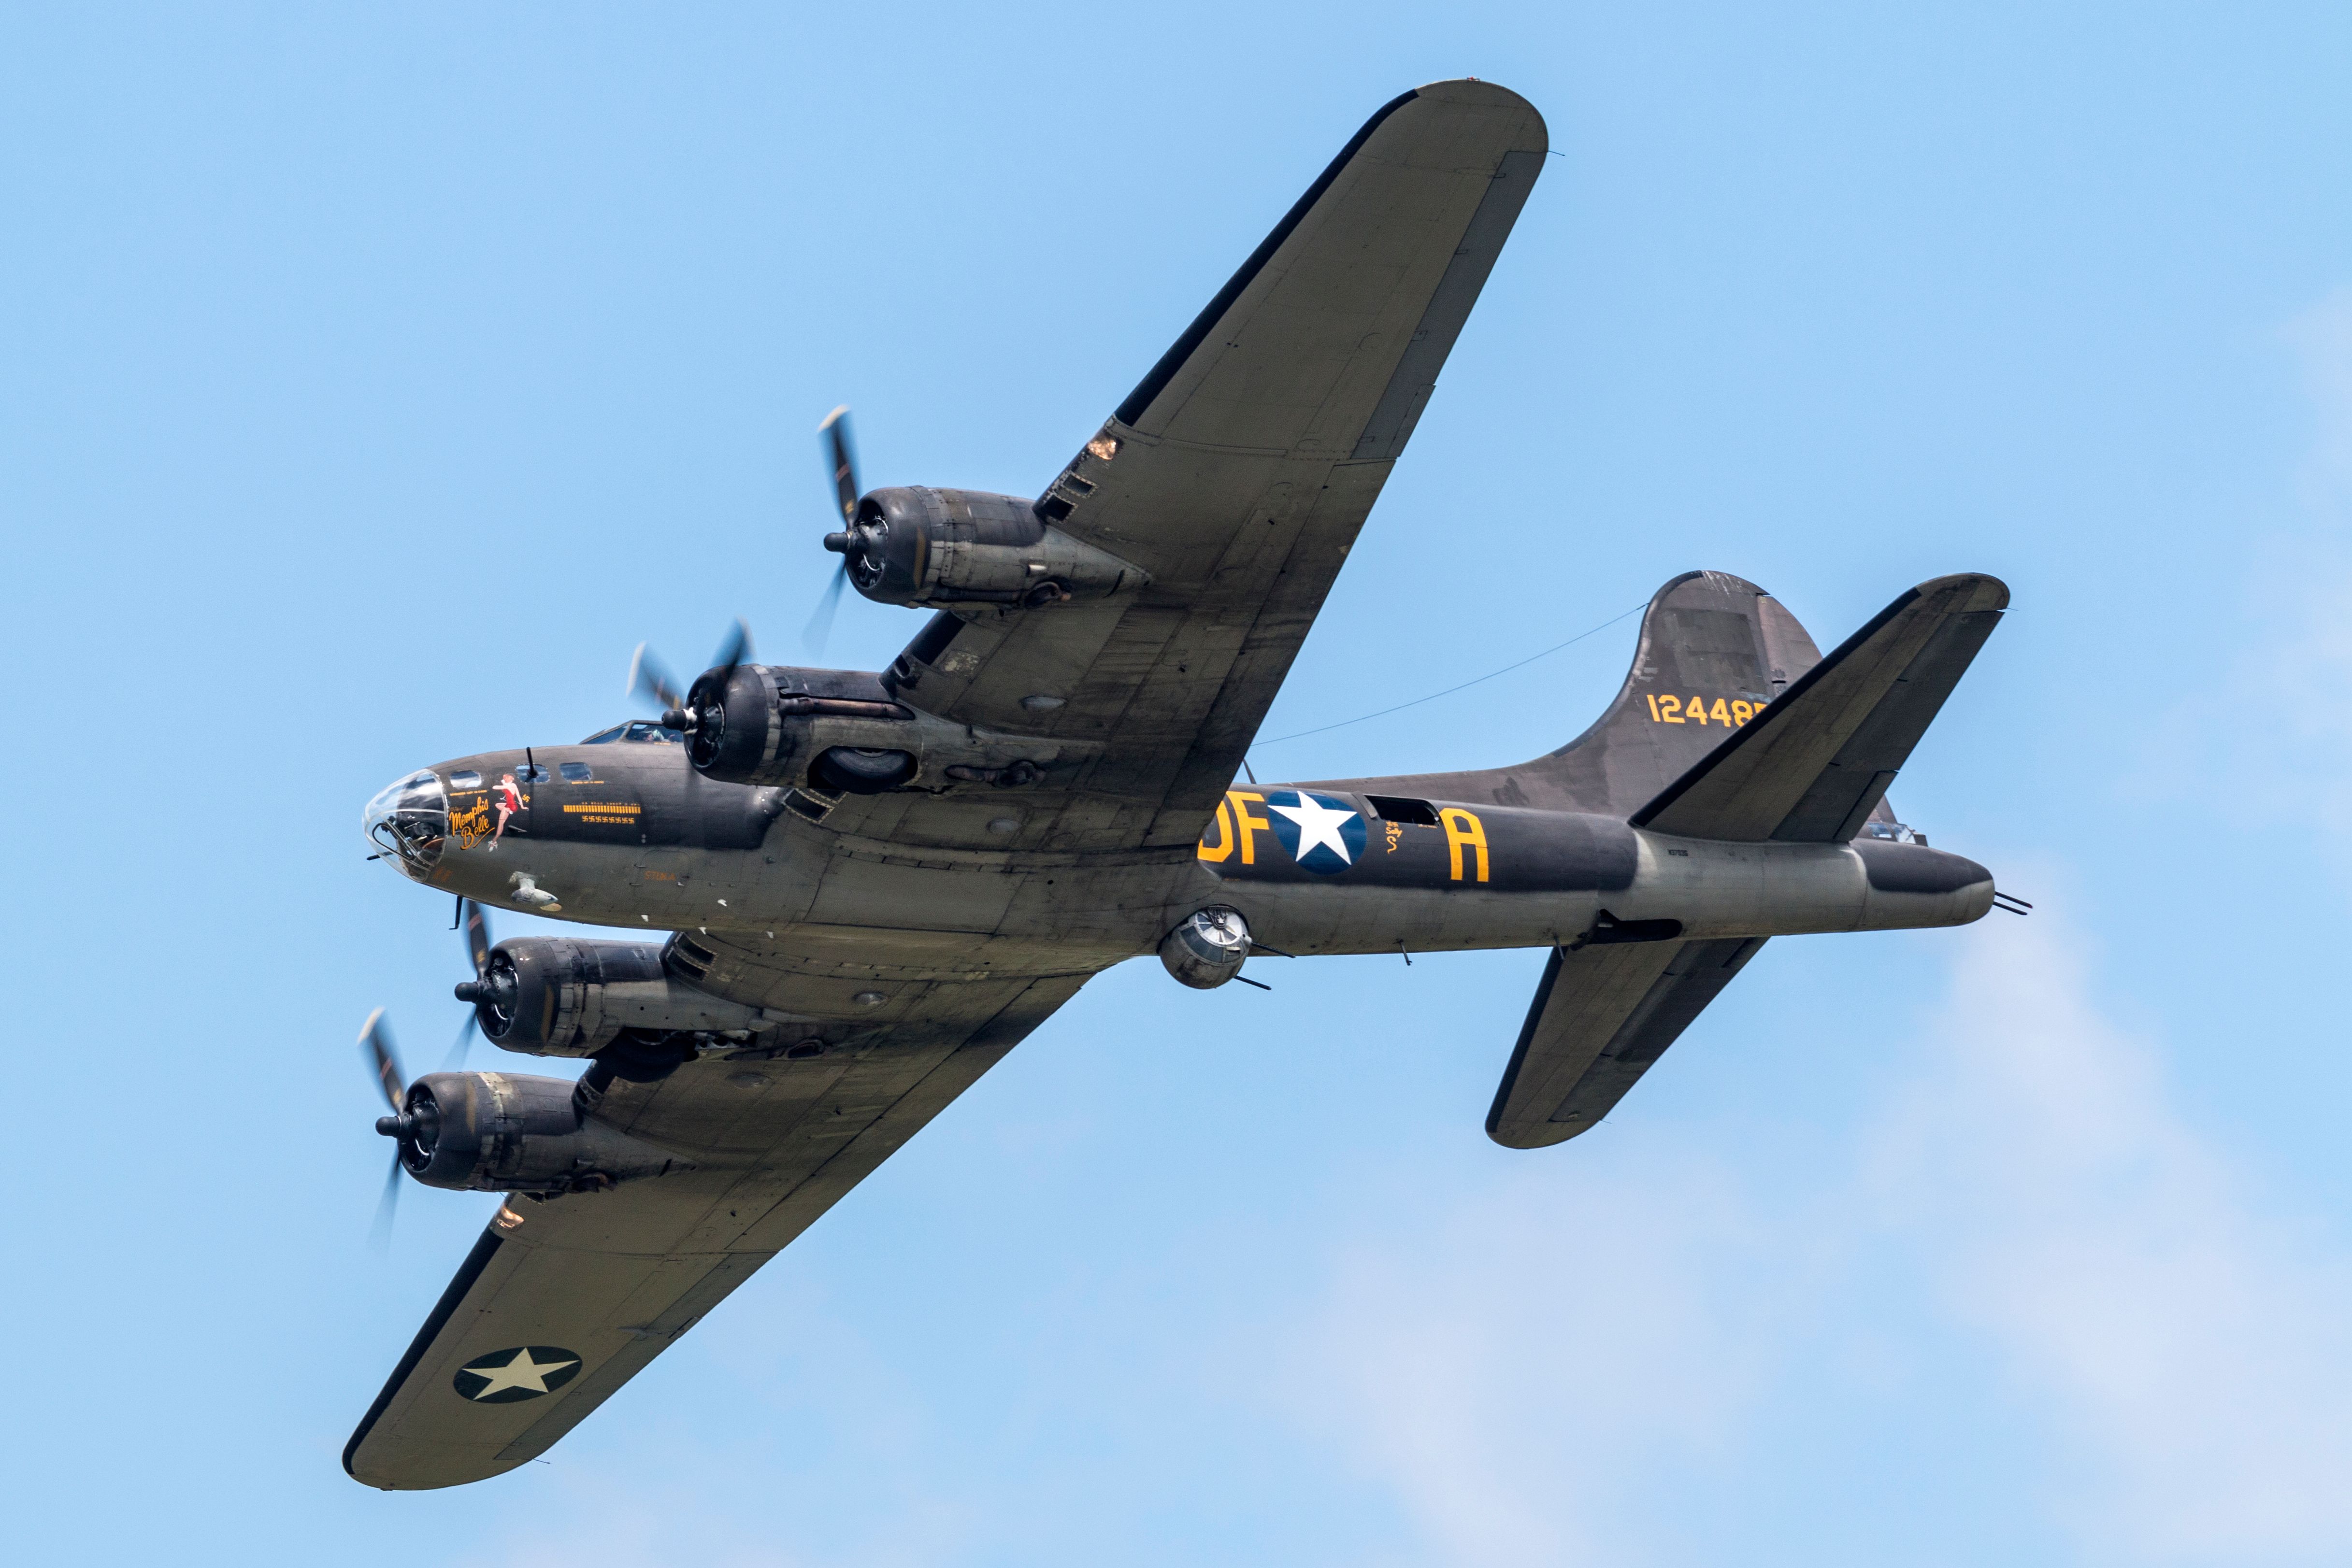 A B-17 flying in the sky.